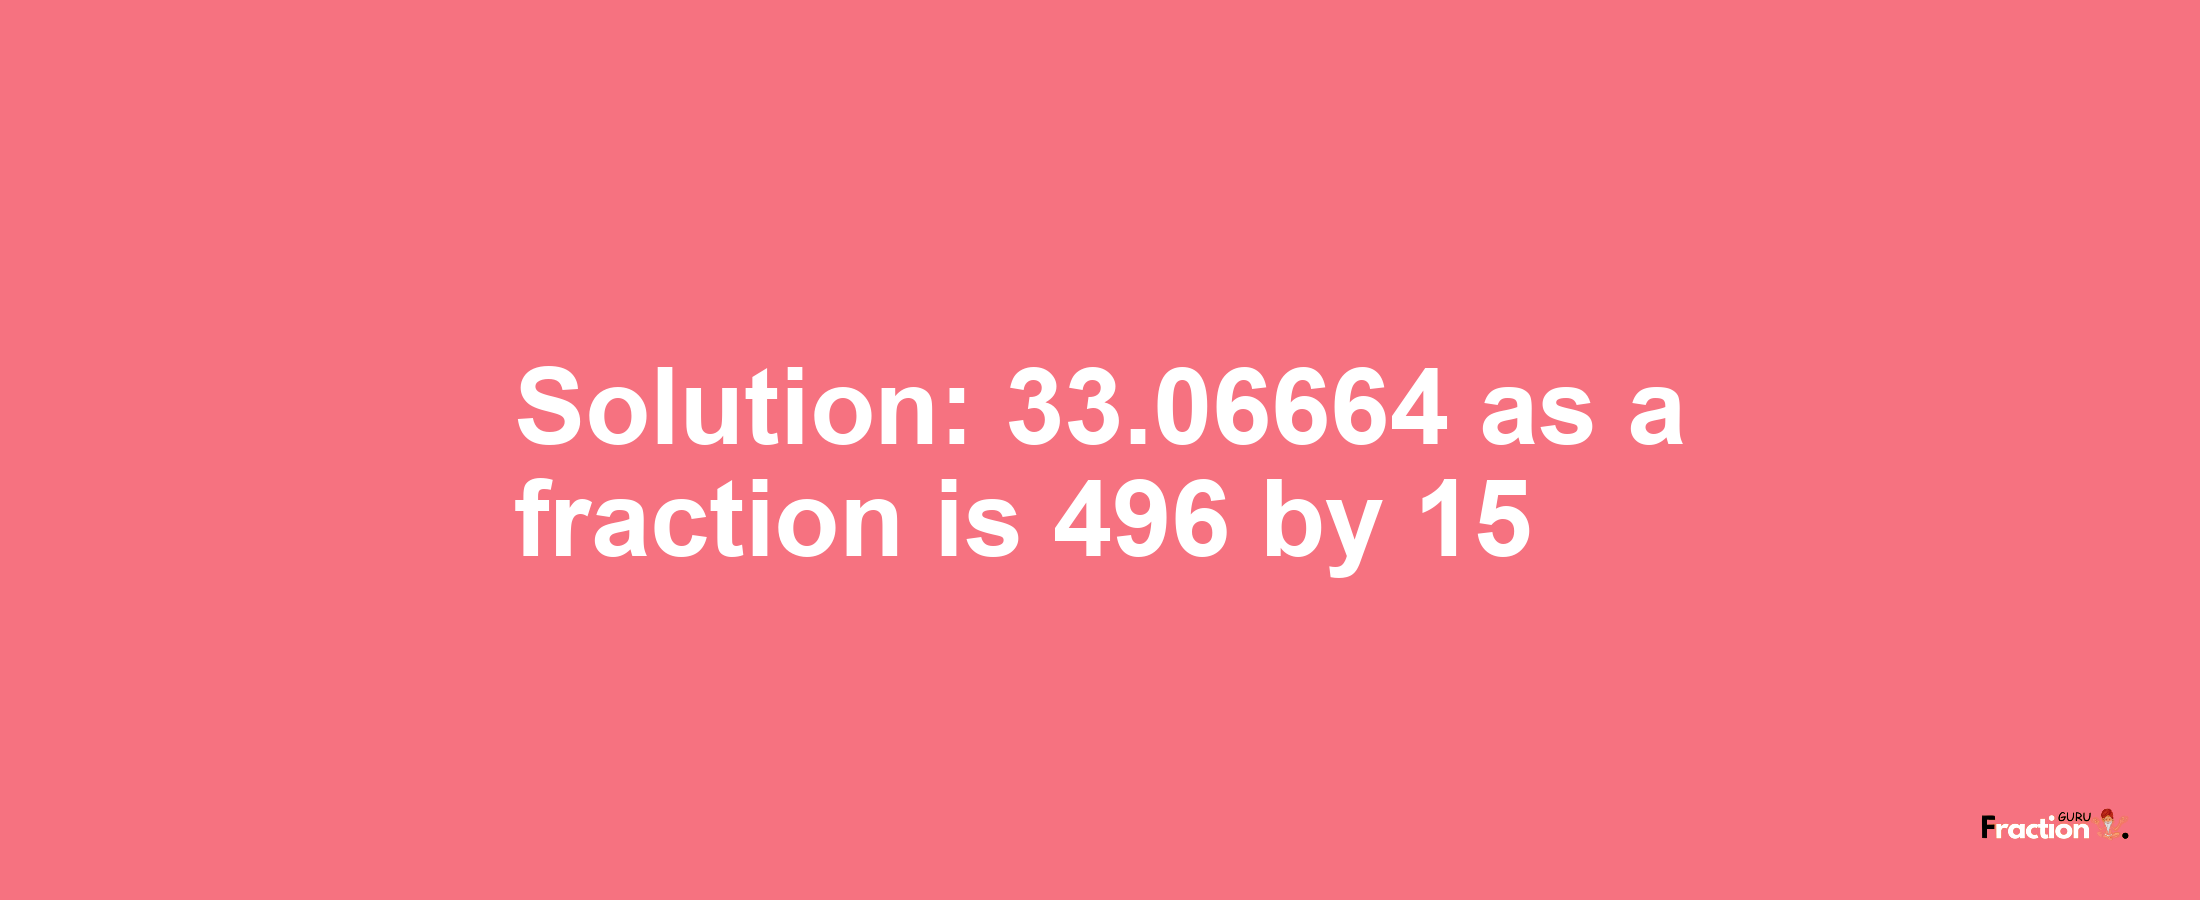 Solution:33.06664 as a fraction is 496/15